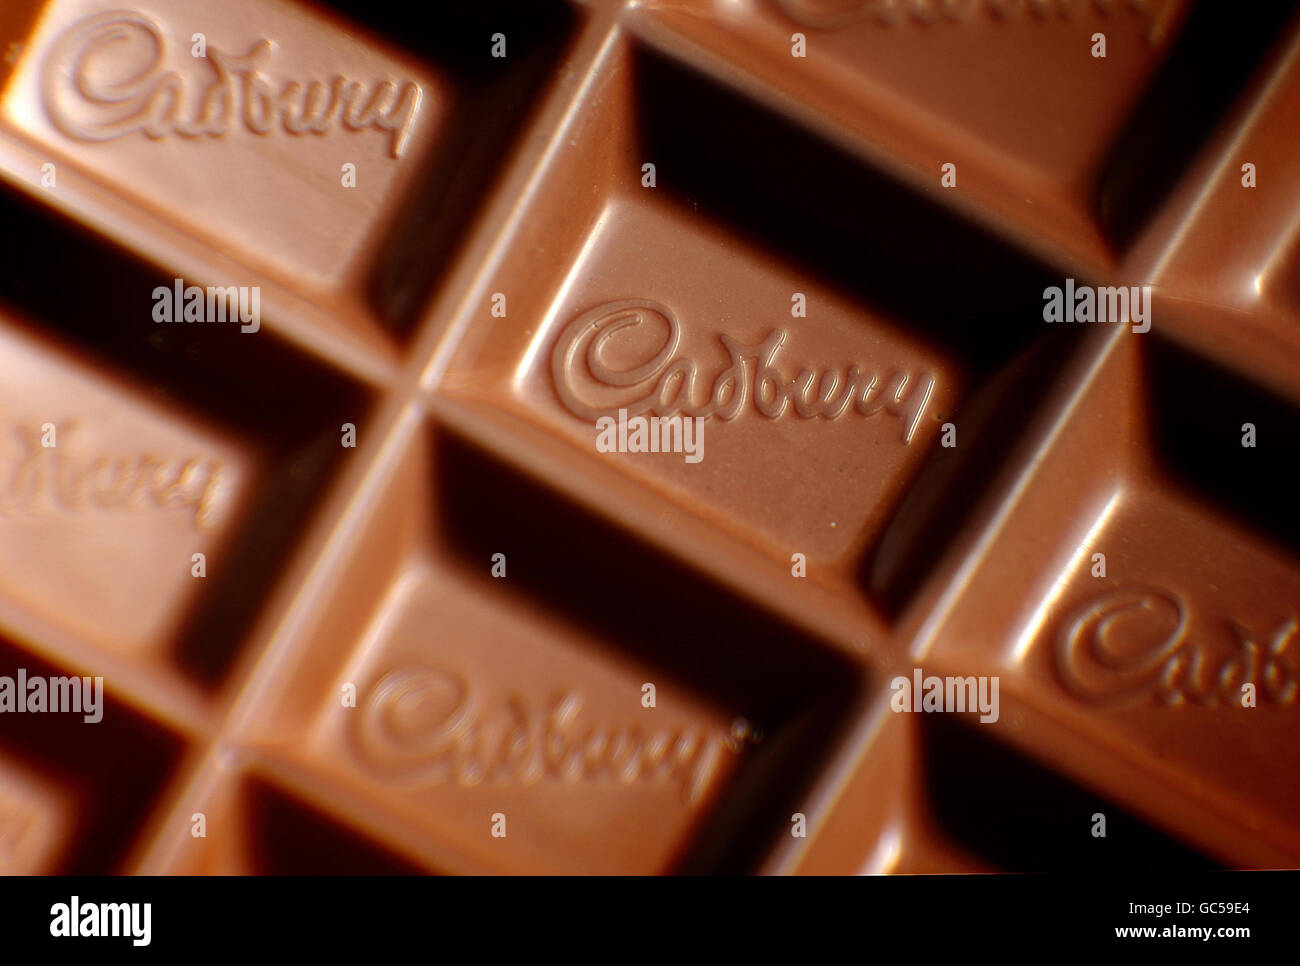 A closeup of a Cadbury logo in a bar of Dairy Milk chocolate. US food giant Kraft today launched a hostile takeover bid for Dairy Milk maker Cadbury. Stock Photo